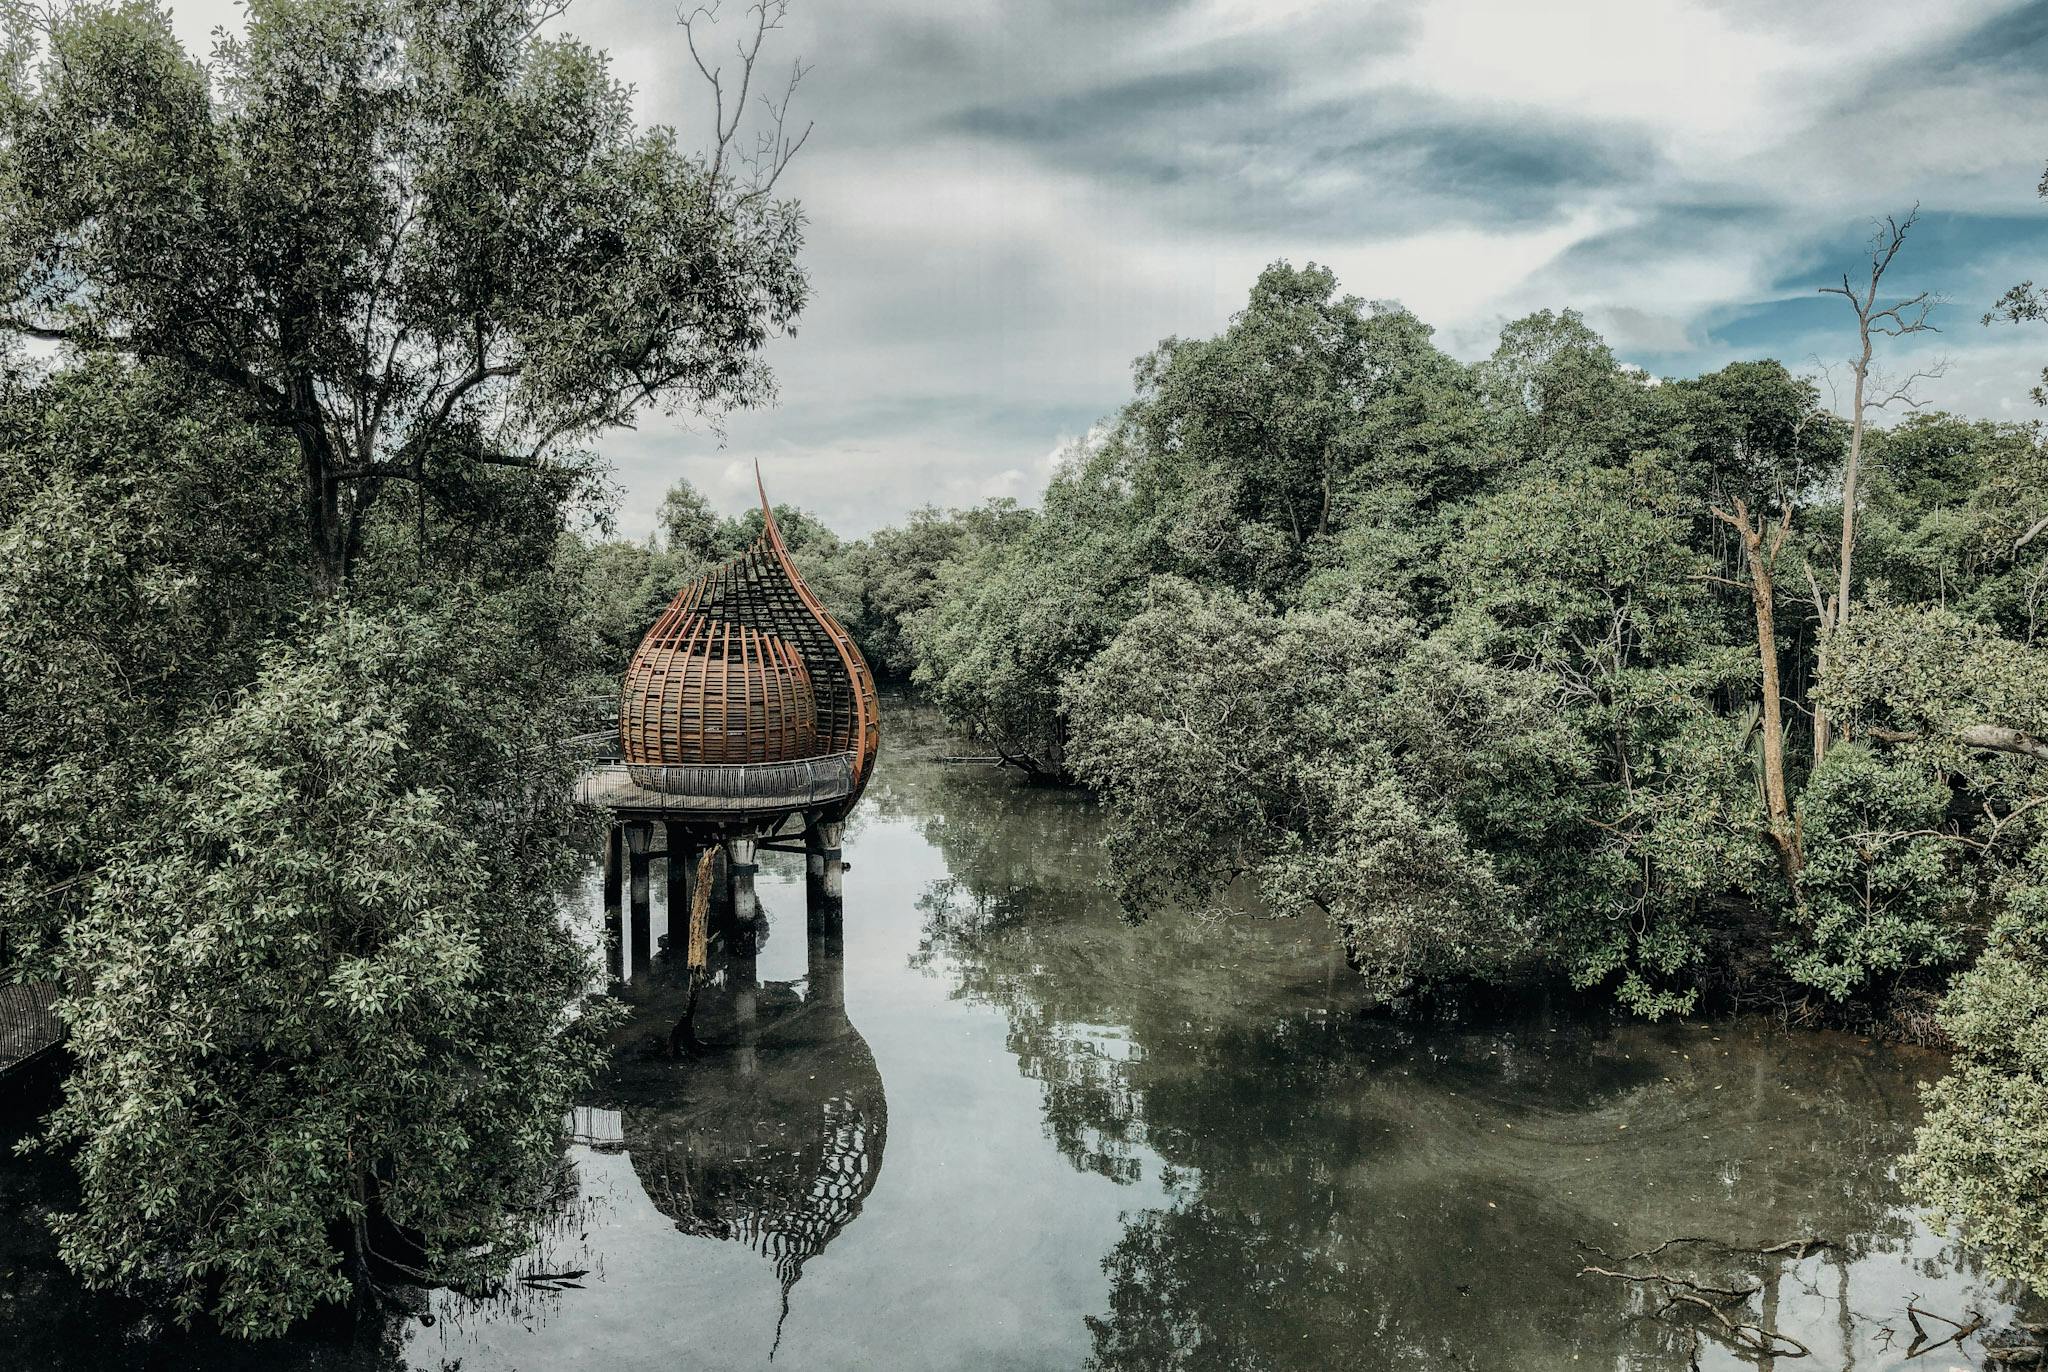 Sungei Buloh is a national park surrounded by mangroves and teeming with wildlife